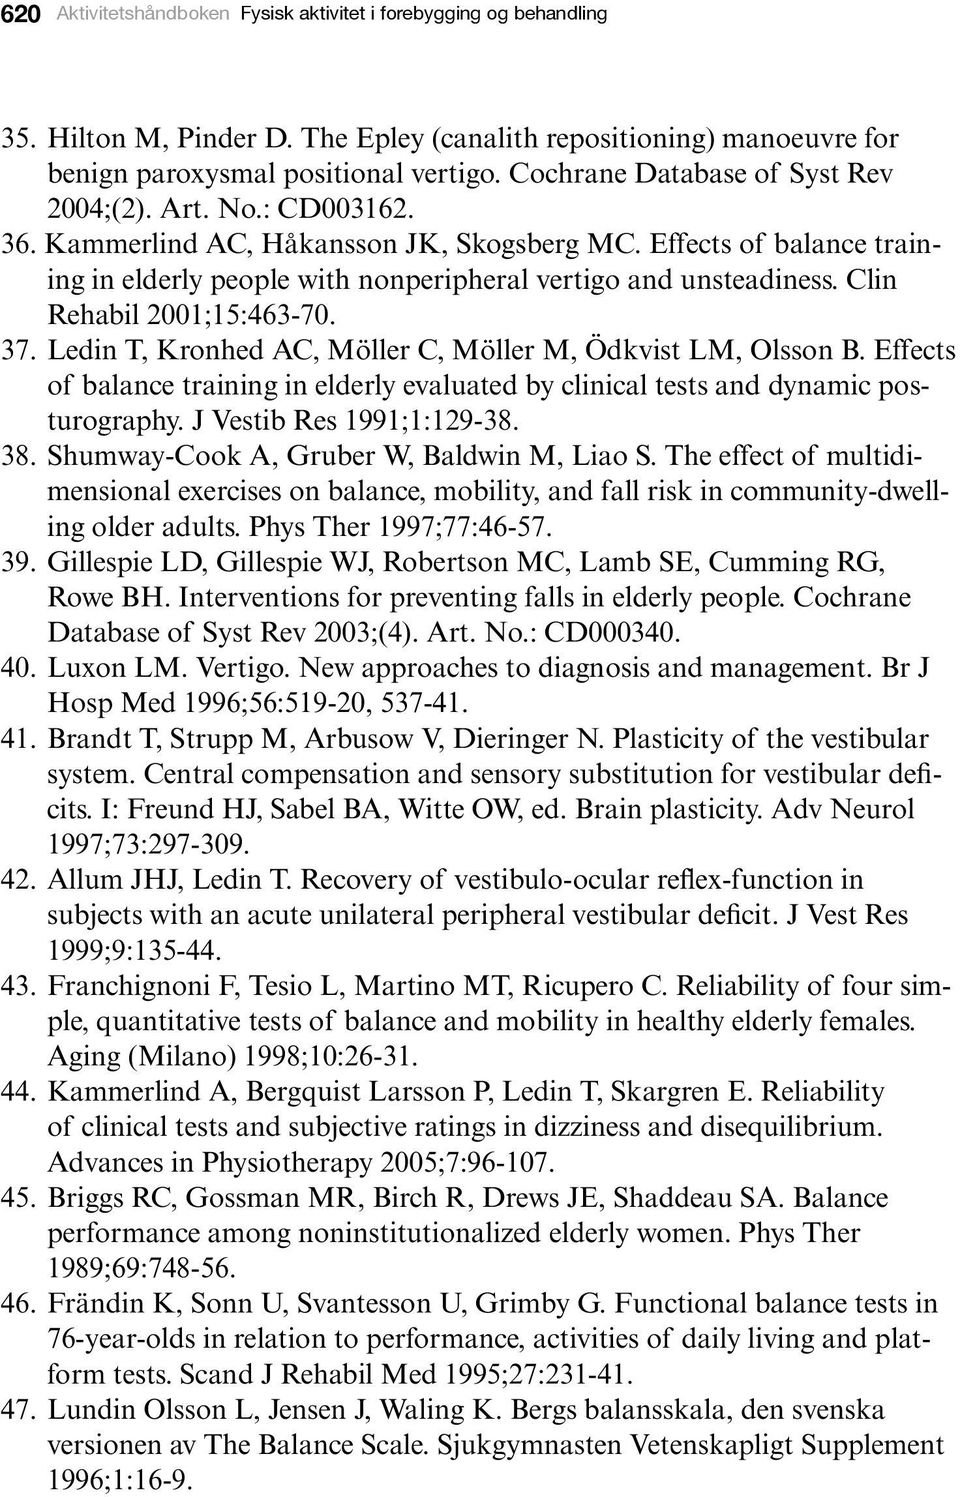 Clin Rehabil 2001;15:463-70. 37. Ledin T, Kronhed AC, Möller C, Möller M, Ödkvist LM, Olsson B. Effects of balance training in elderly evaluated by clinical tests and dynamic posturography.